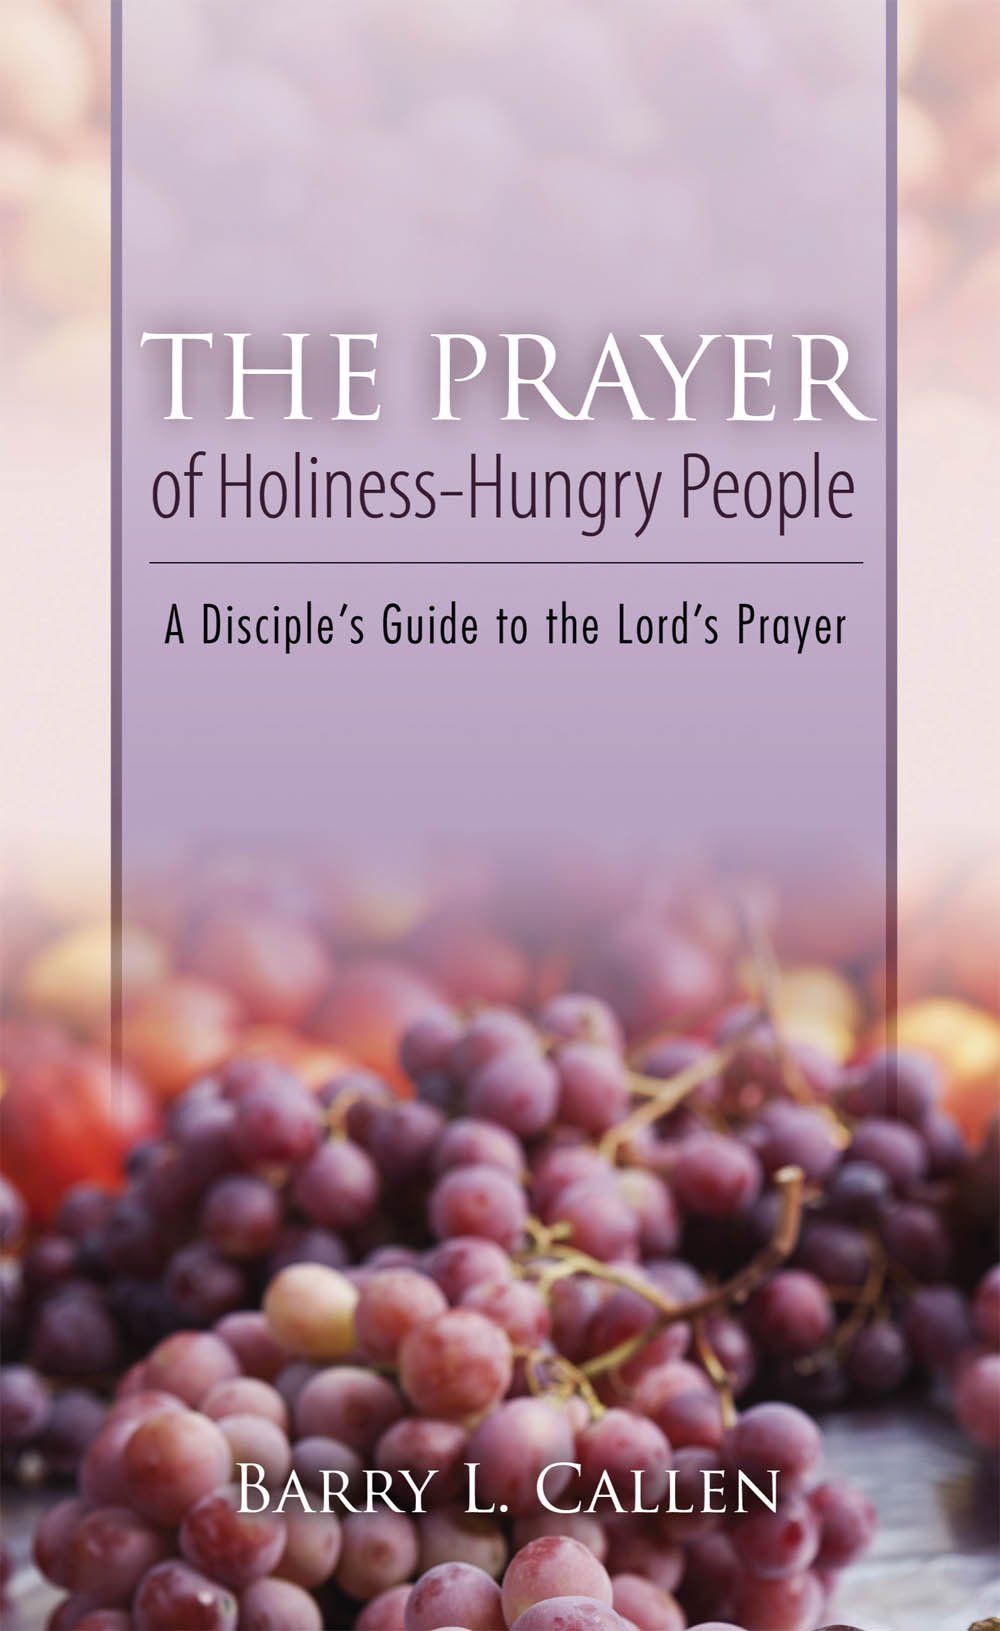 The Prayer of Holiness-Hungry People